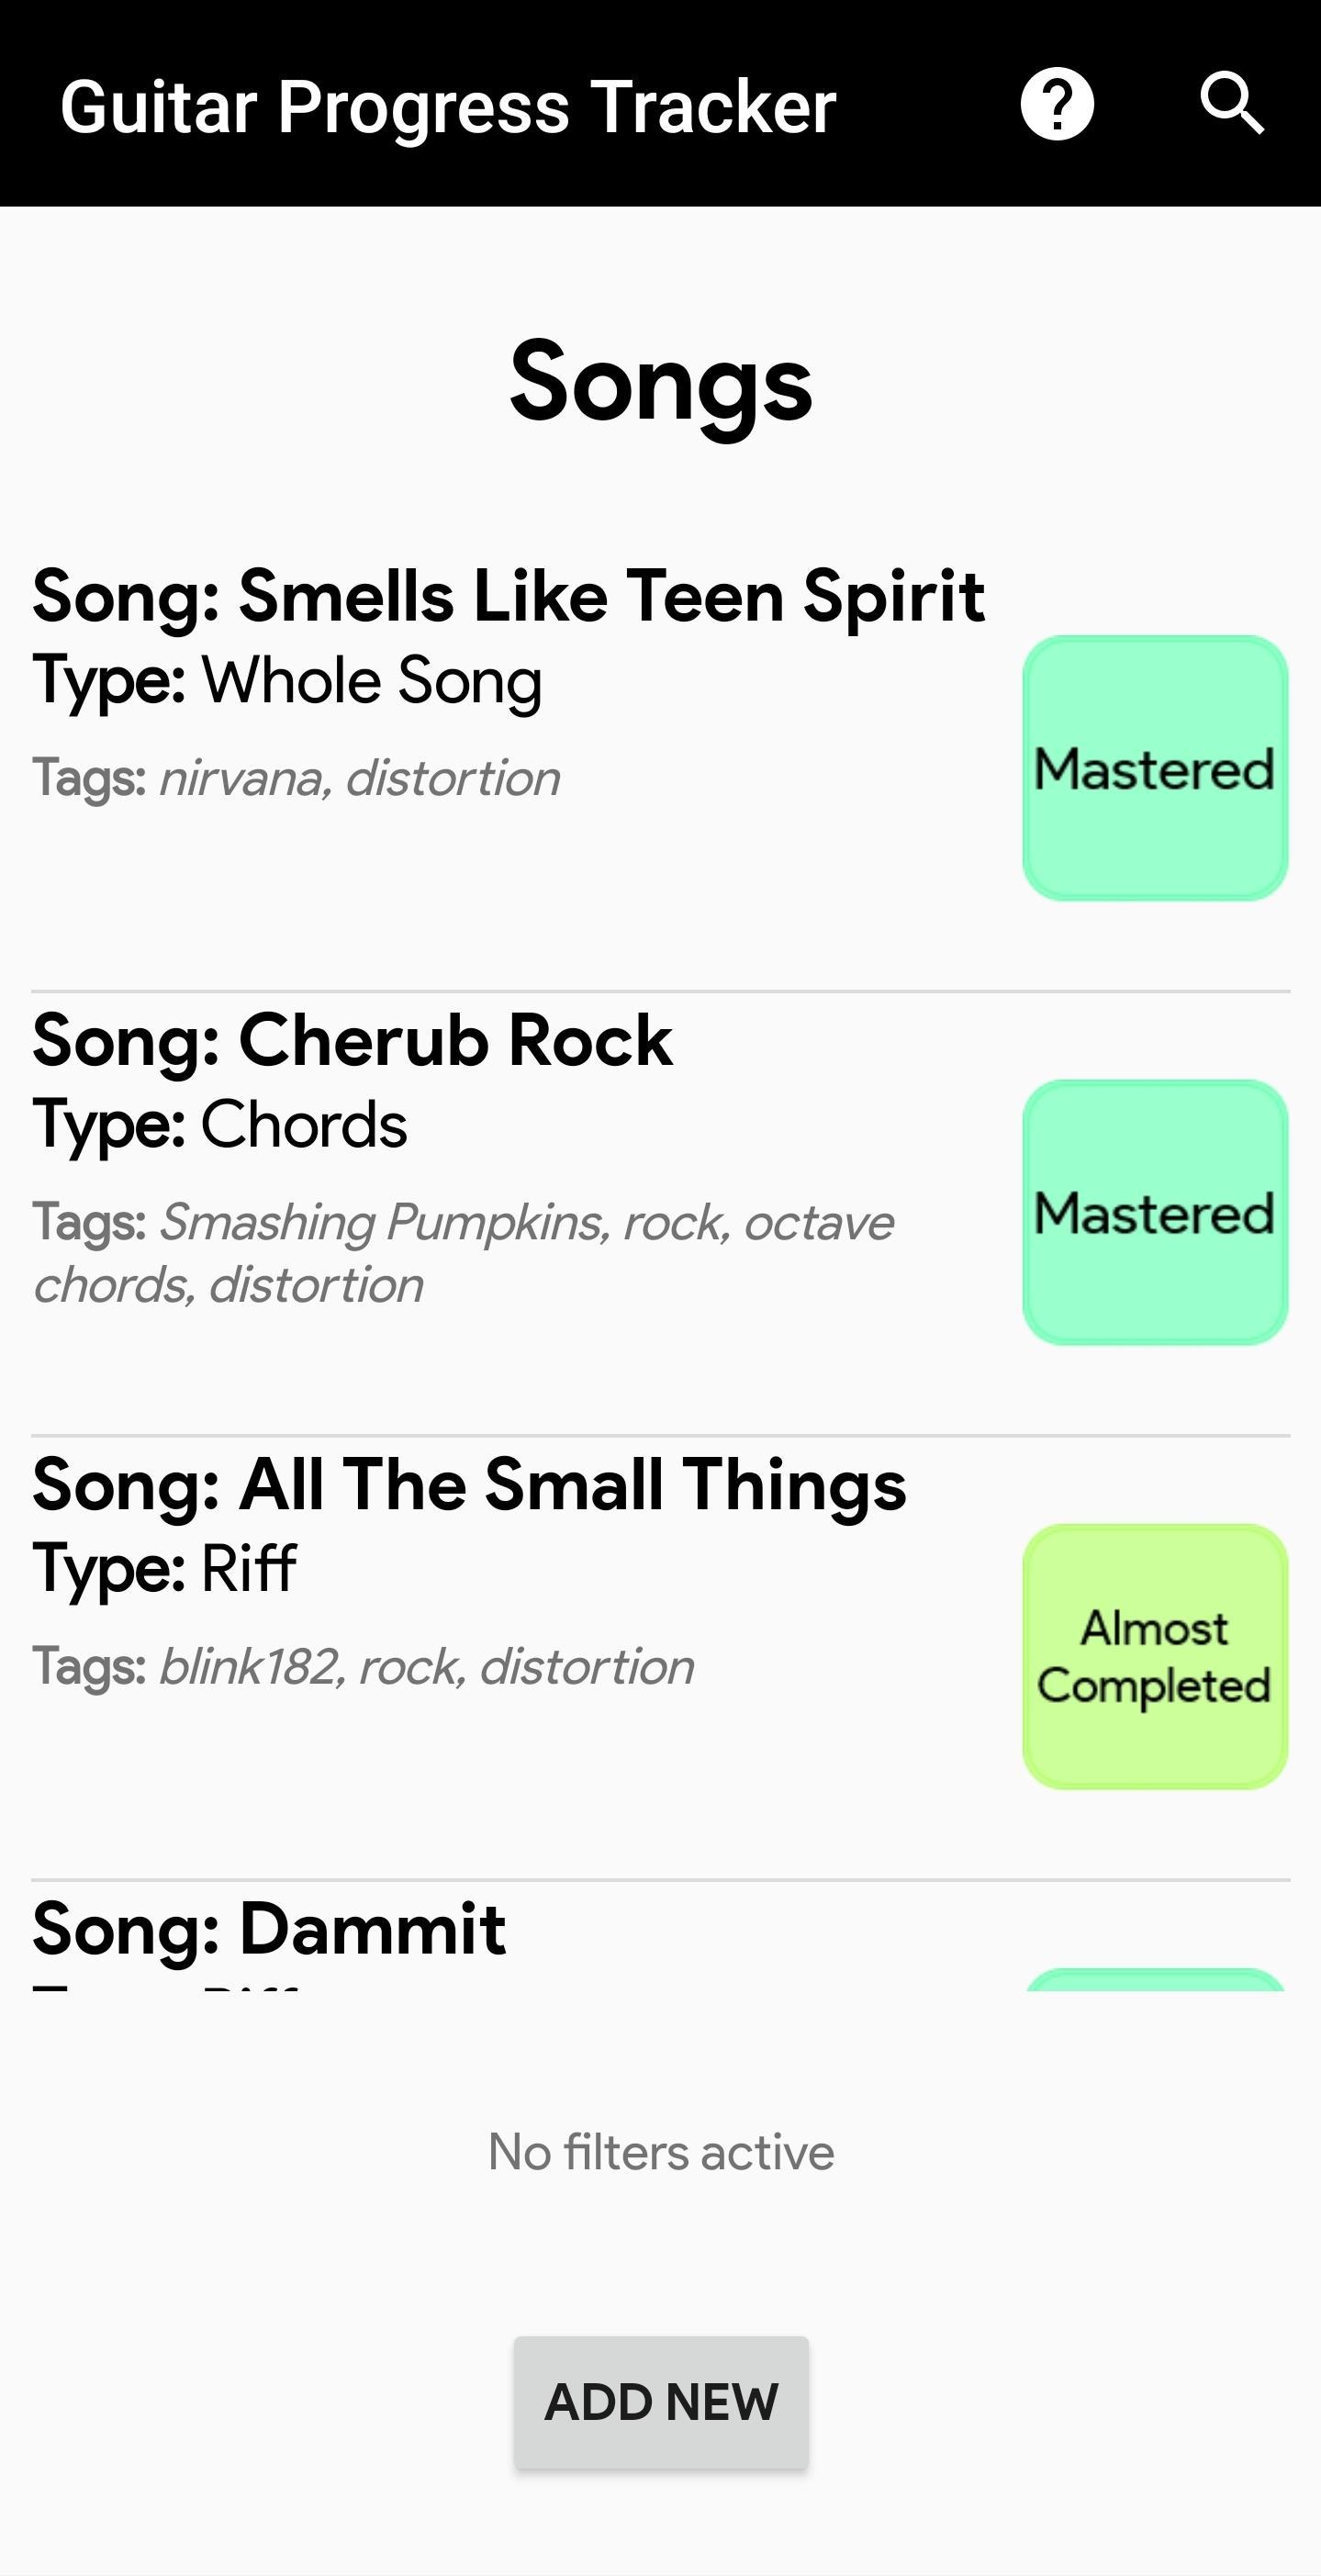 Guitar Progress Tracker for Android - APK Download